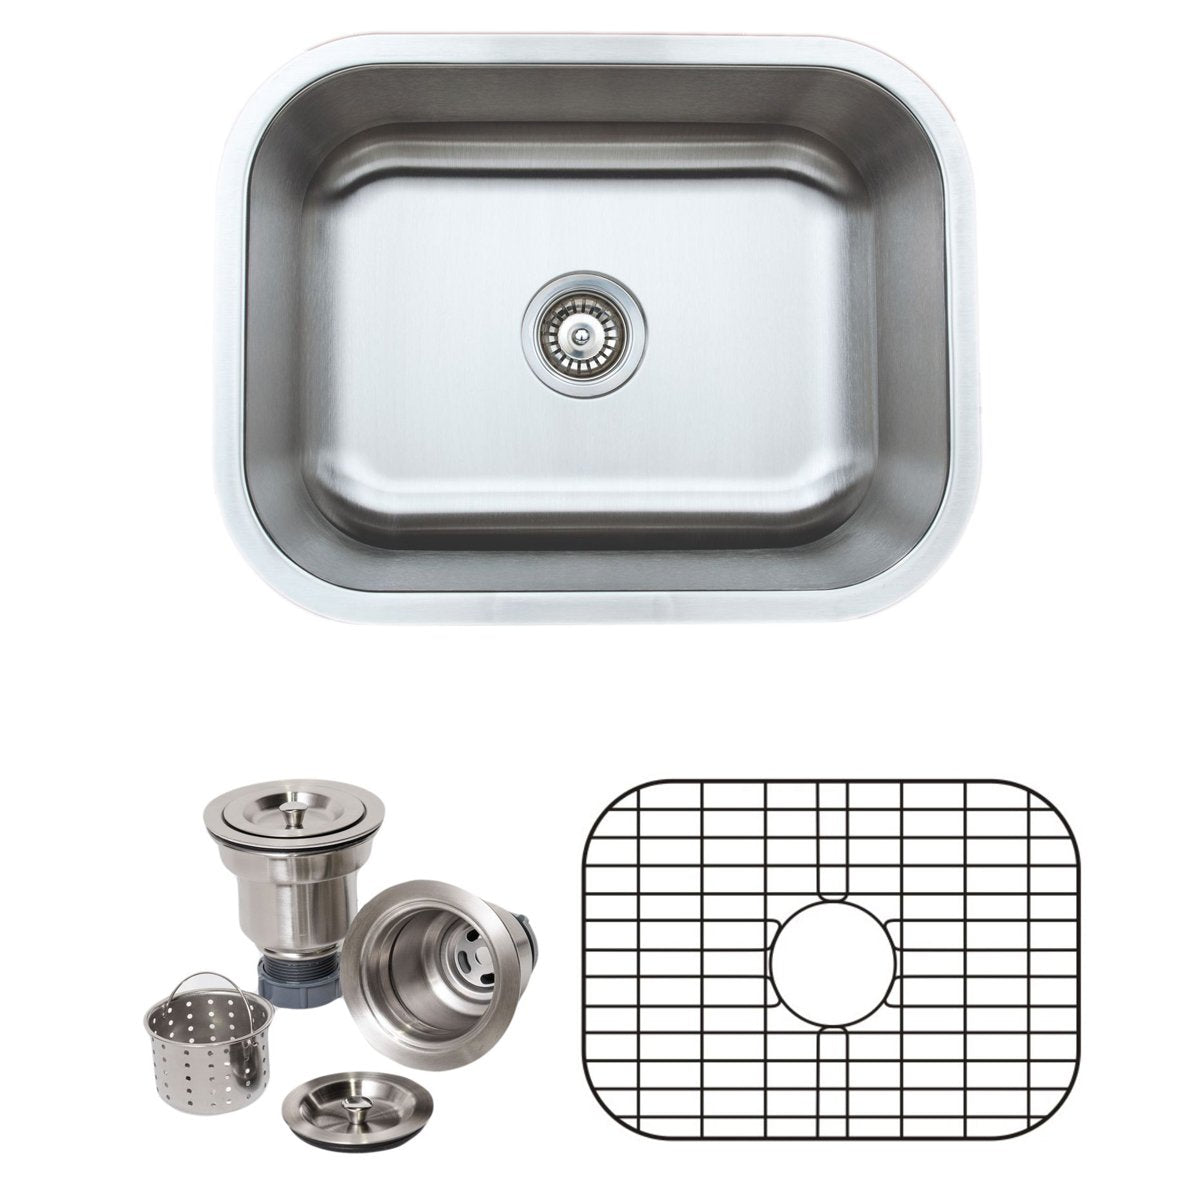 Wells Sinkware 23-Inch 18-Gauge Undermount Single Bowl Stainless Steel Kitchen Sink with Grid Rack and Basket Strainer-Kitchen Sinks Fast Shipping at Directsinks.